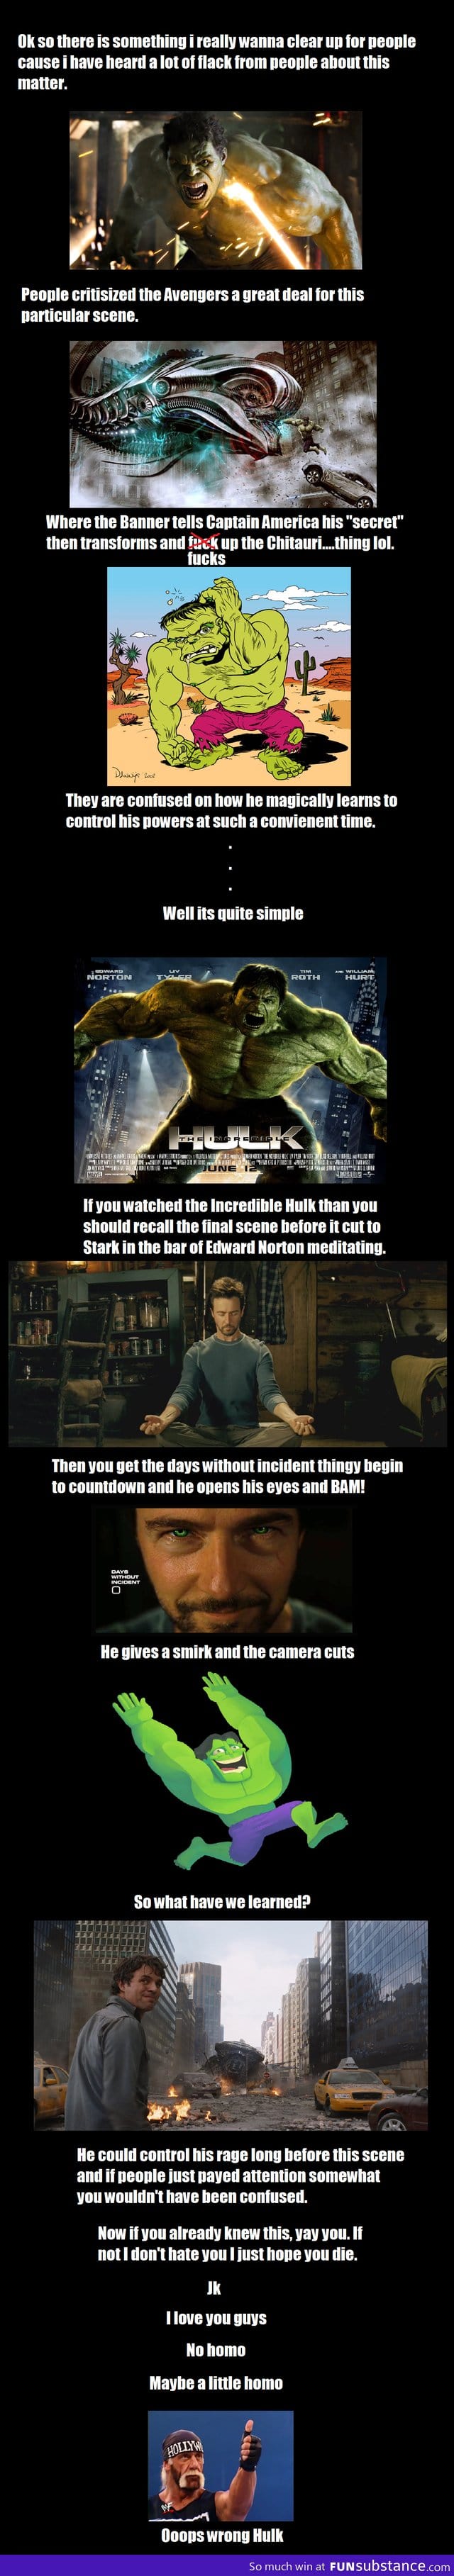 How Hulk manage to control his powers in The Avengers